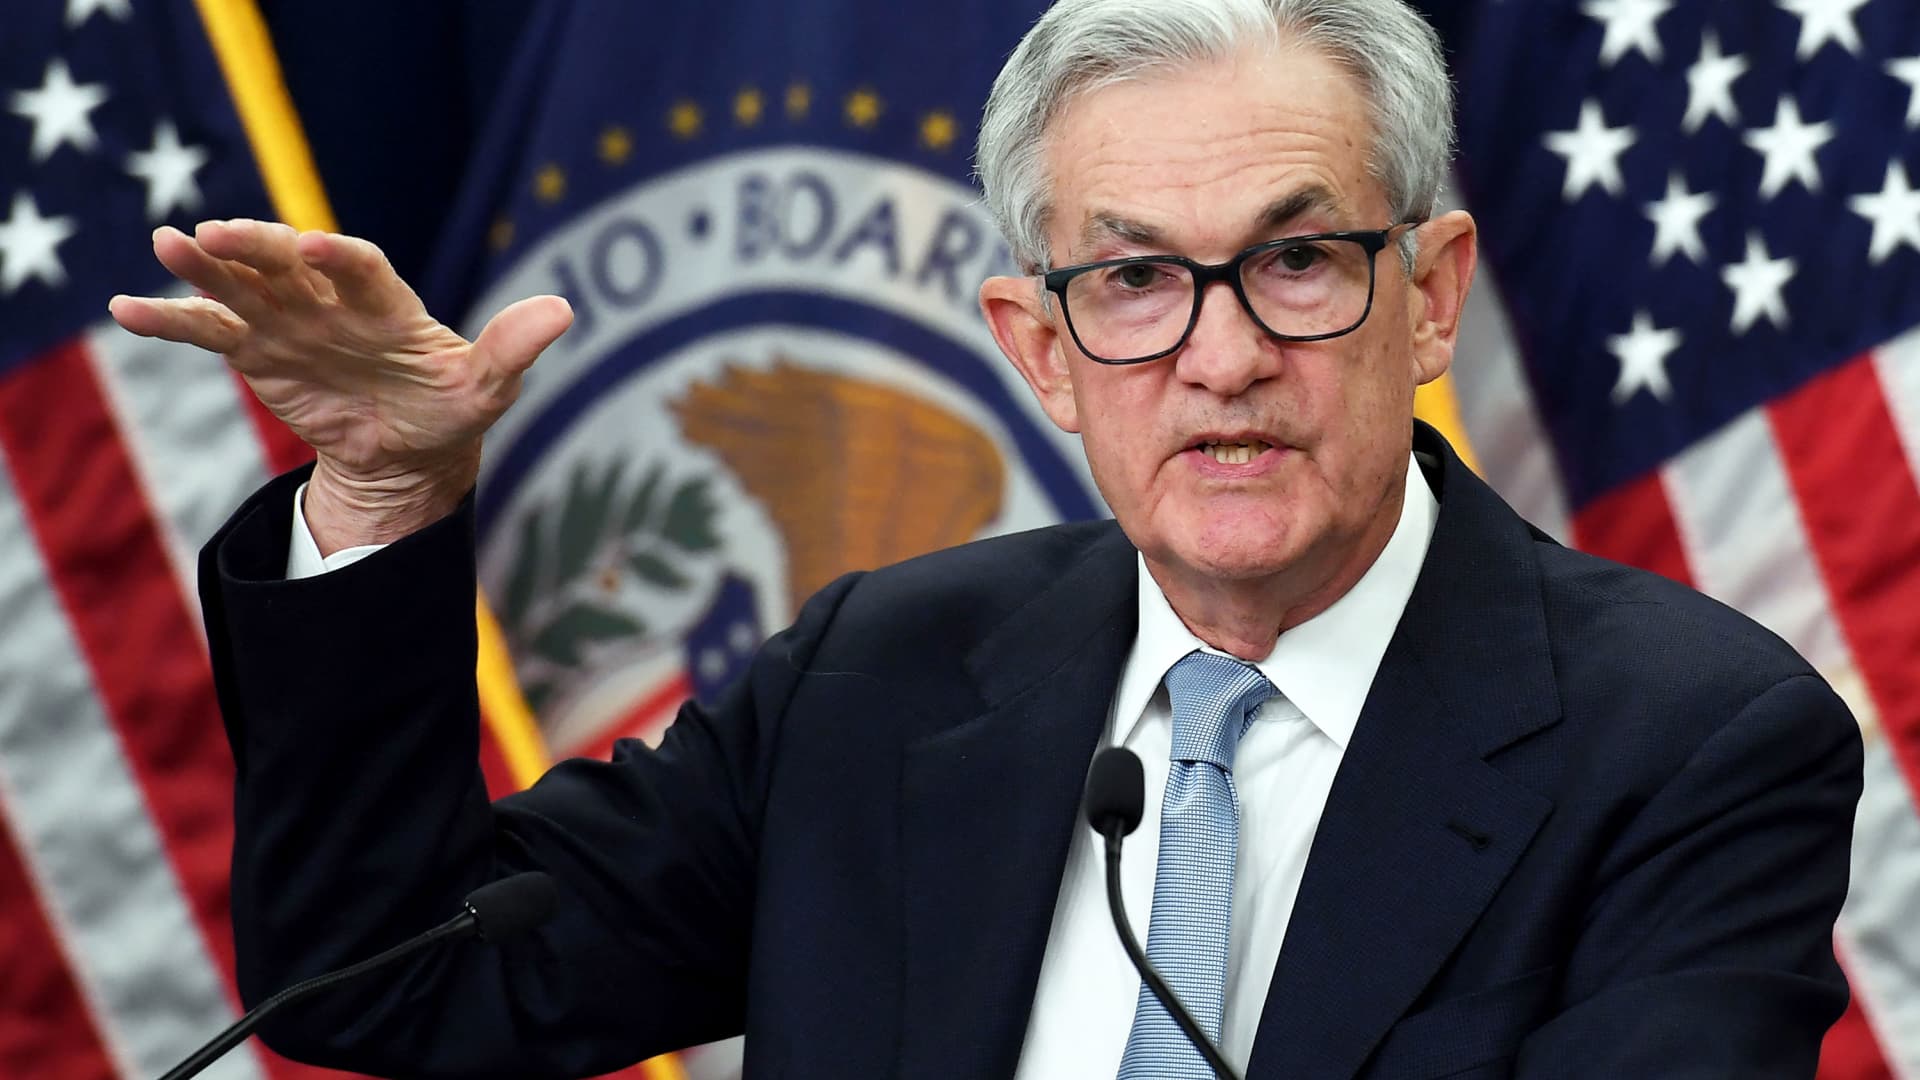 Financial conditions are tightening after SVB’s collapse and could slow the economy, Powell says